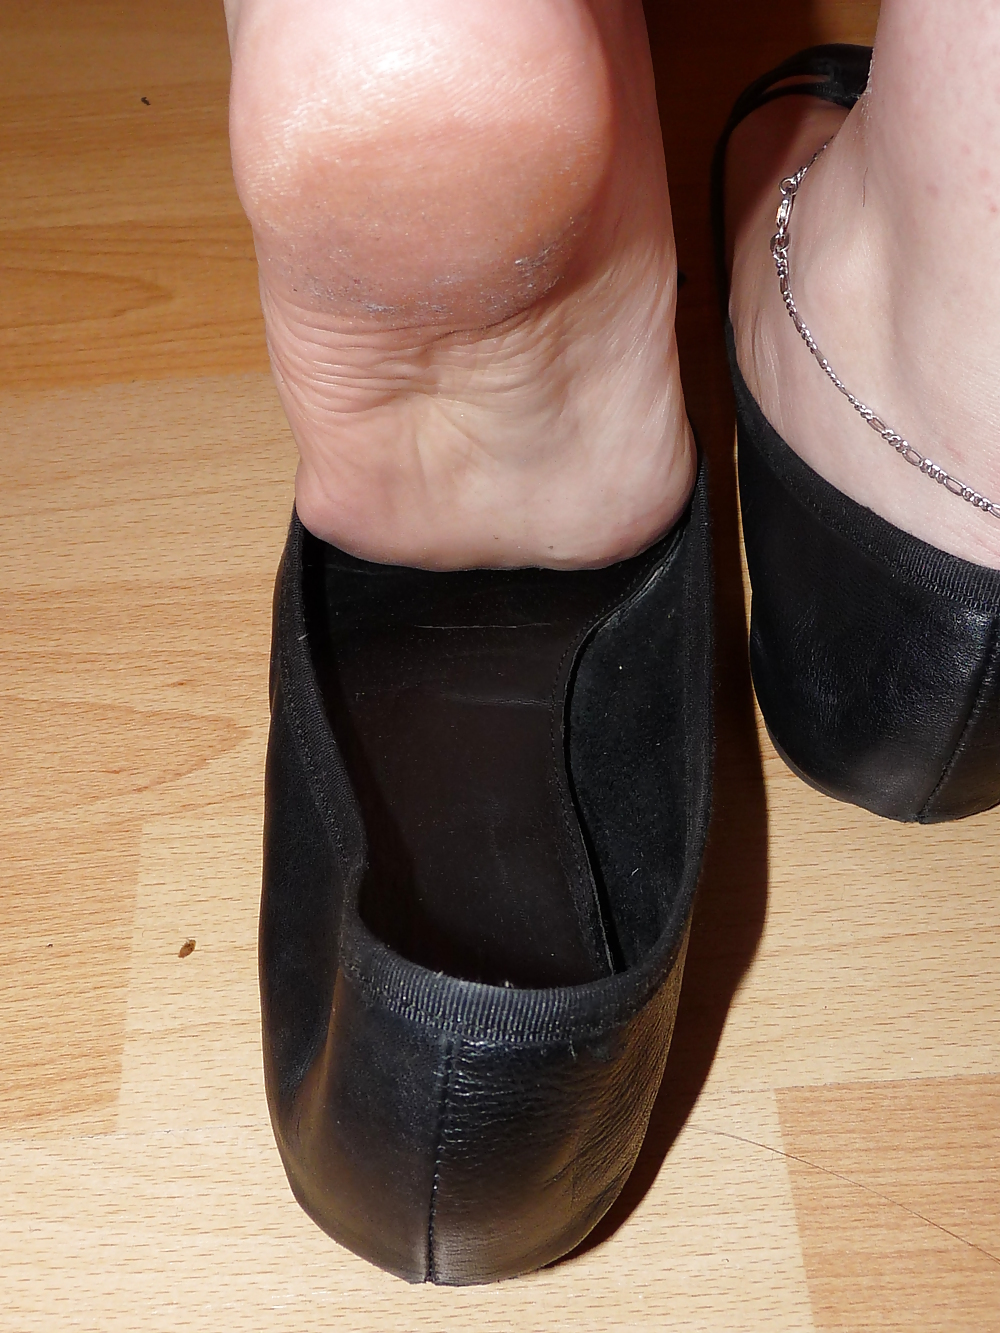 Wifes sexy black leather ballerina ballet flats shoes  #37860644